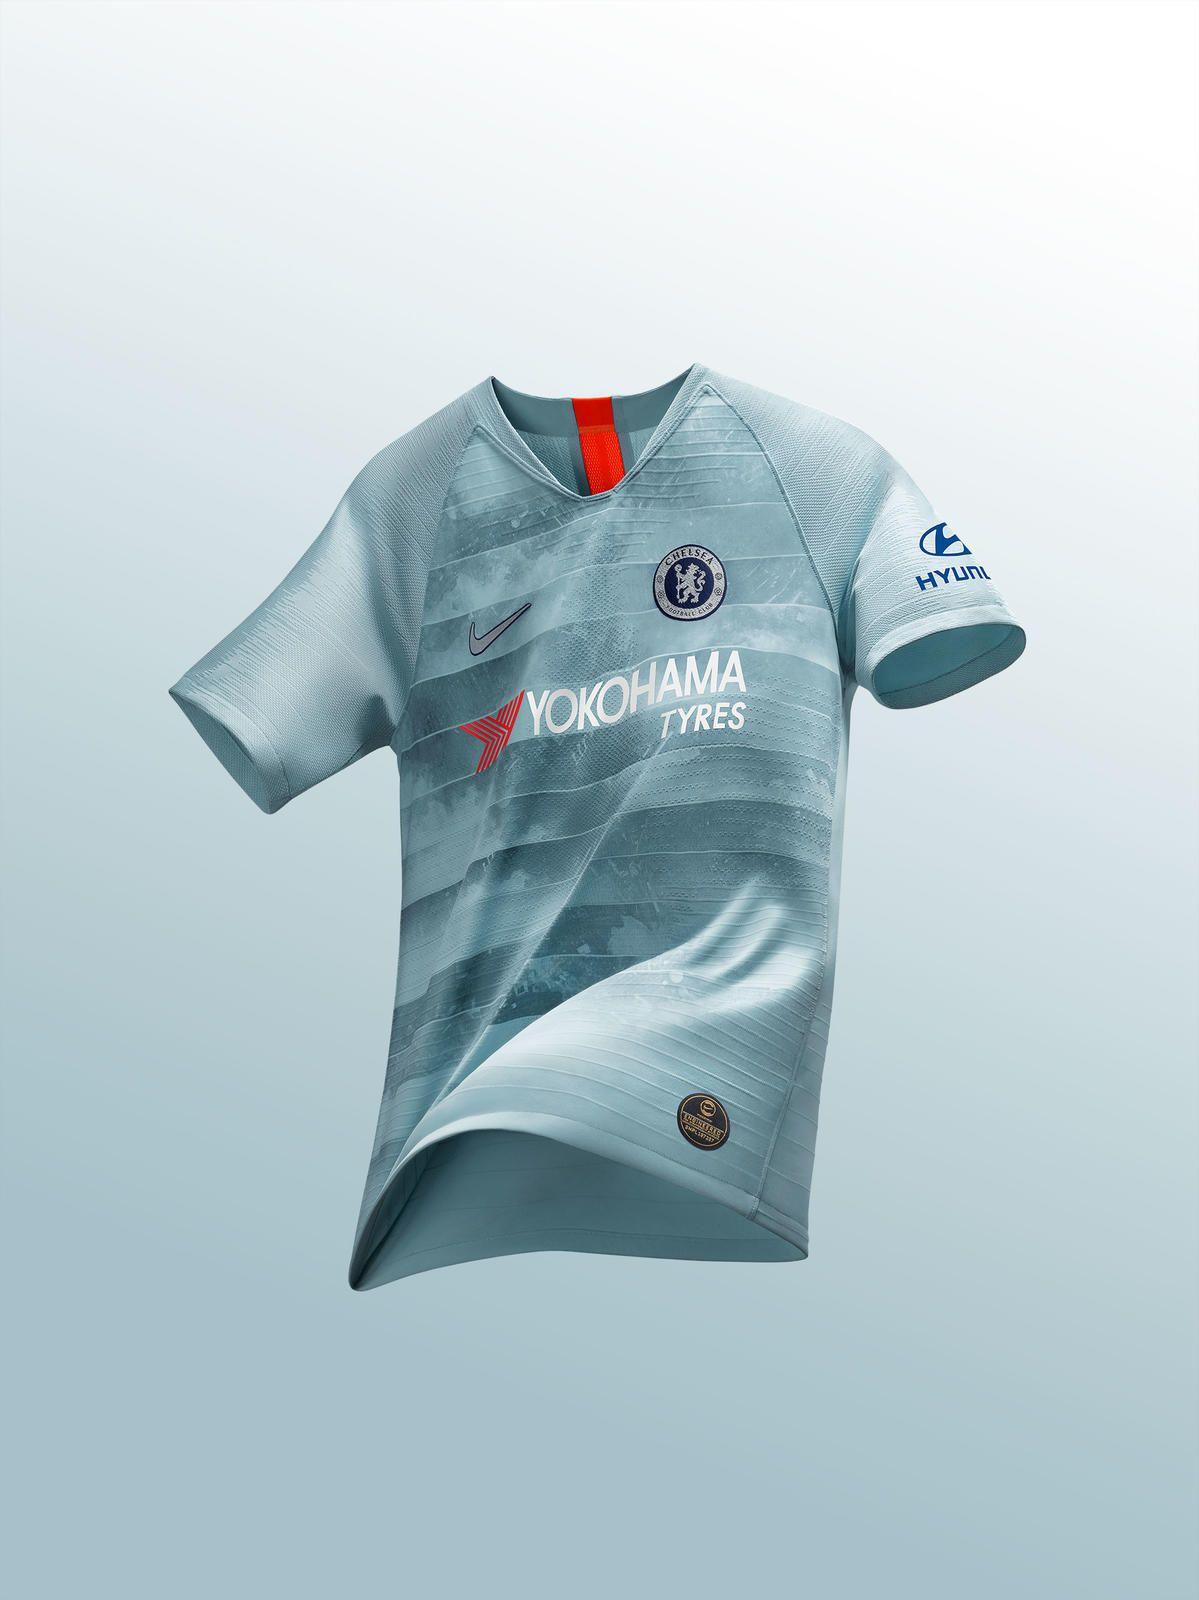 Chelsea Launch Rather Unique 2018 19 Third Kit, Featuring The Latest